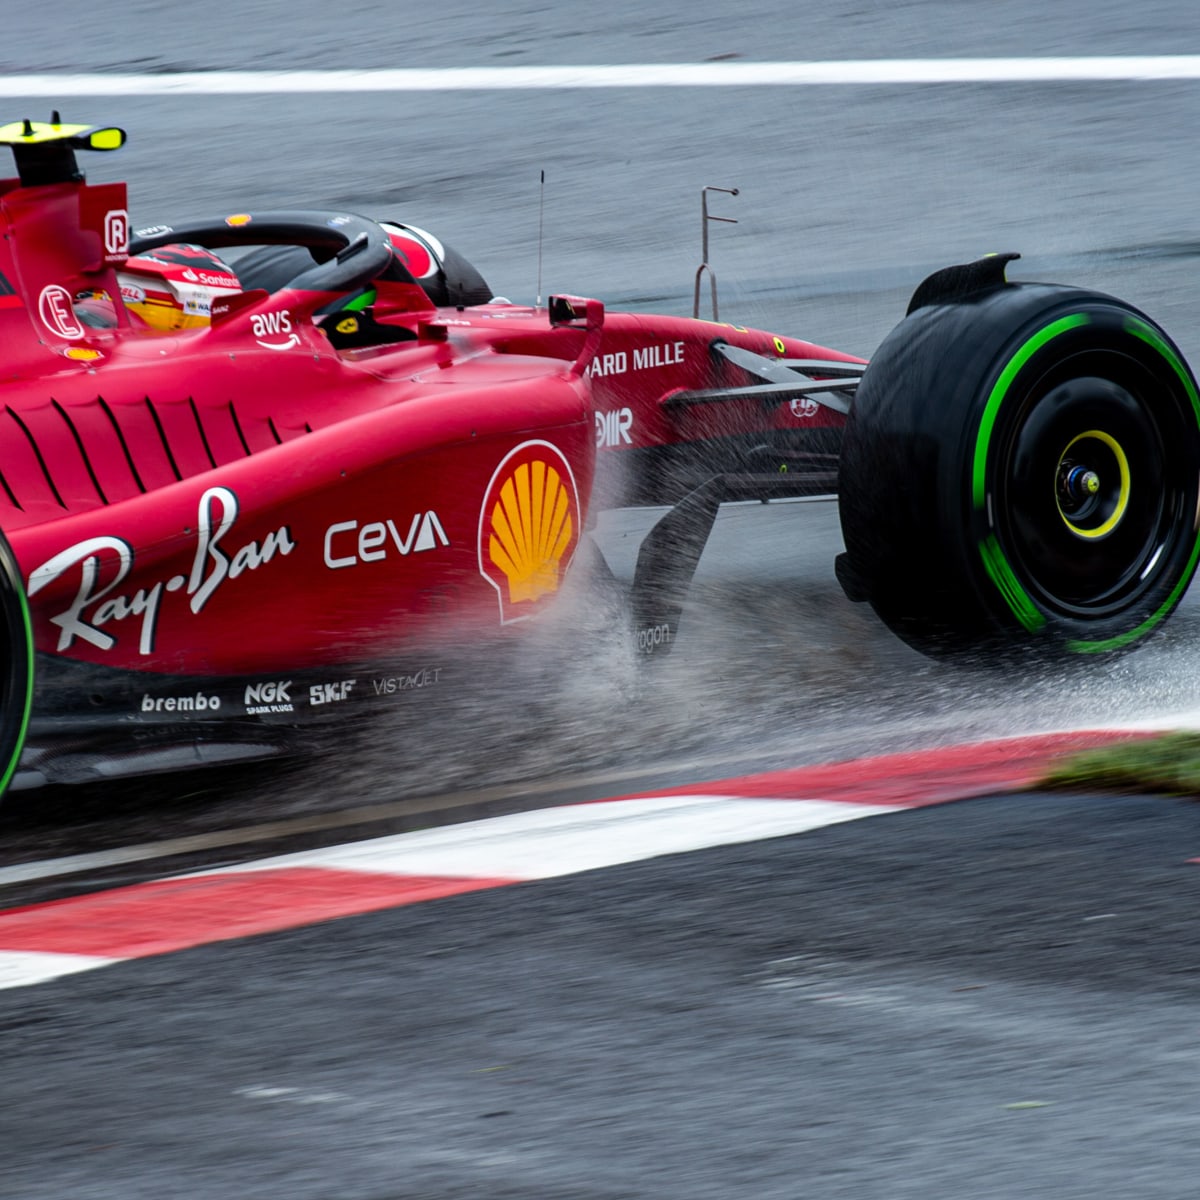 Ferrari's F1 2022 engine gains greatest for more than 25 years